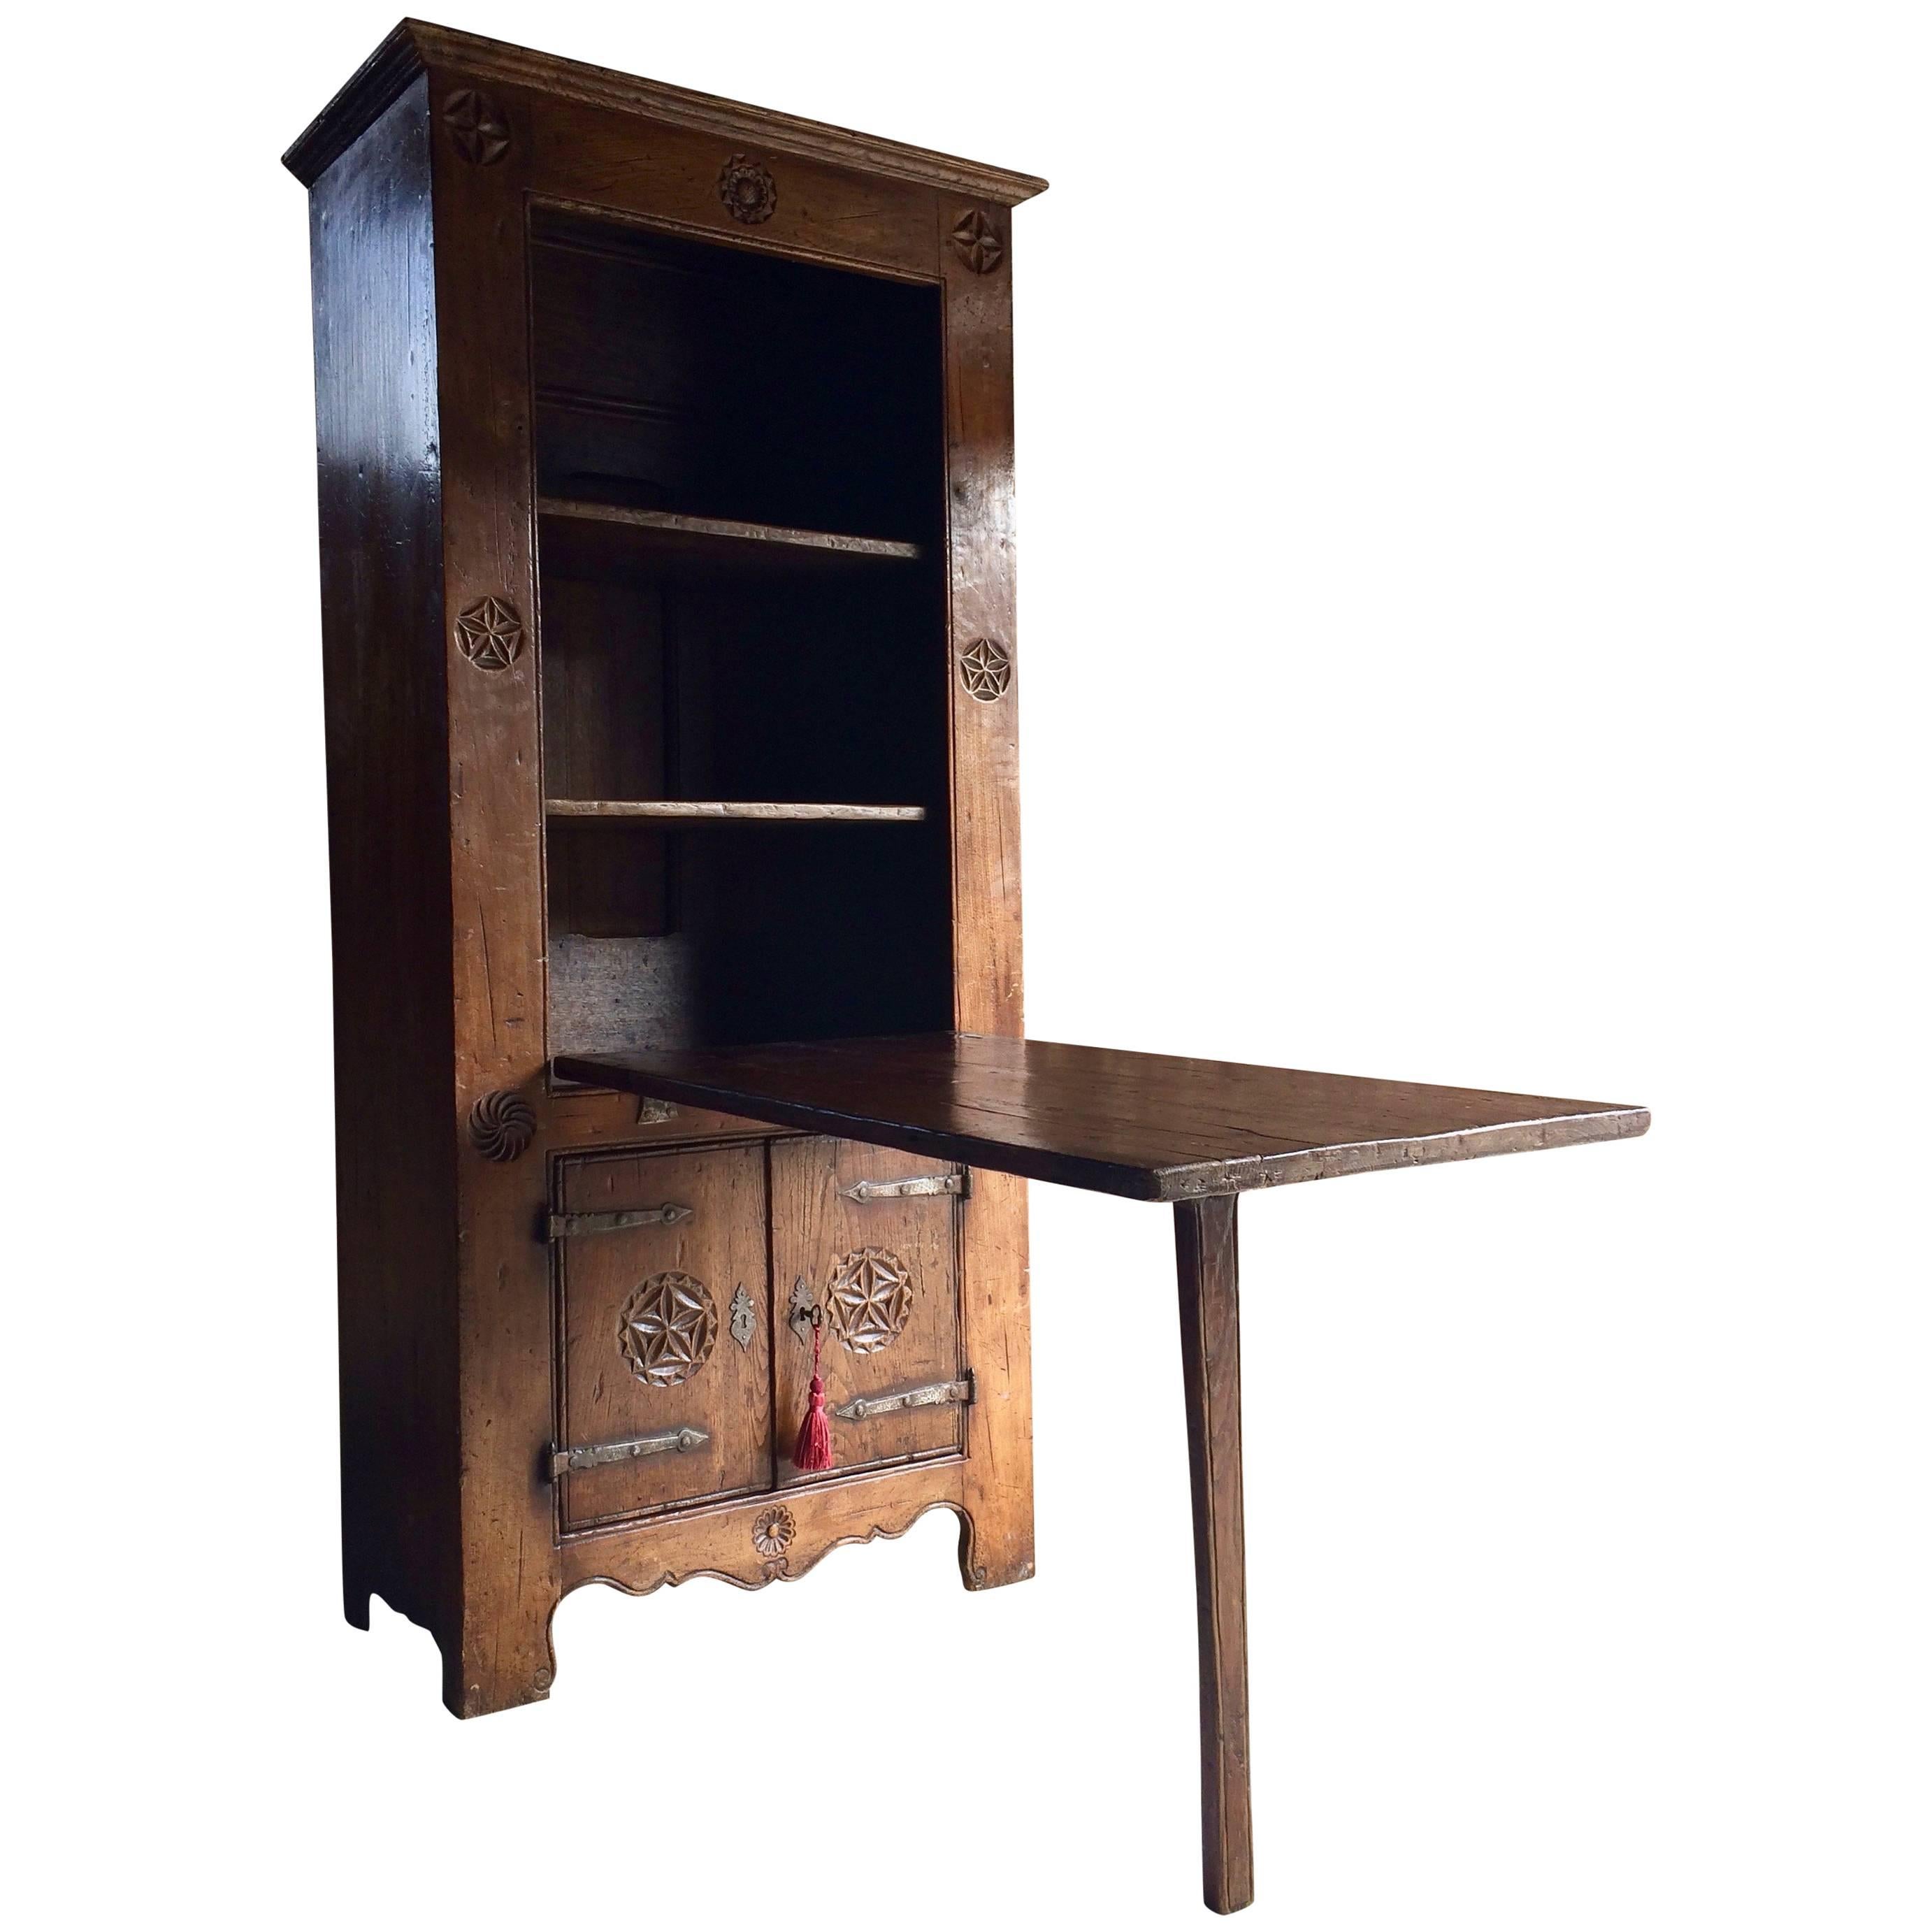 Rare 16th century style Dutch solid oak cupboard featuring a drop-down farmhouse table, the corniced top over a single drop down door with original hand forged iron hinges, the door with a single swing down leg that drops down to form a table, two